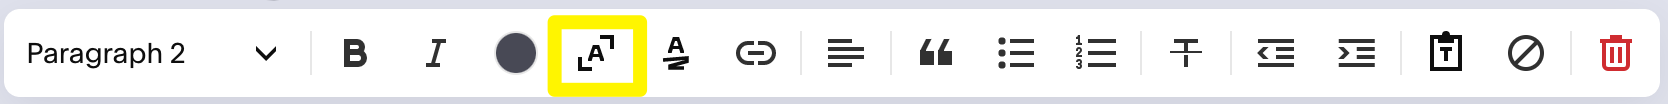 Scaling_text_icon_Squarespace_text_toolbar.png